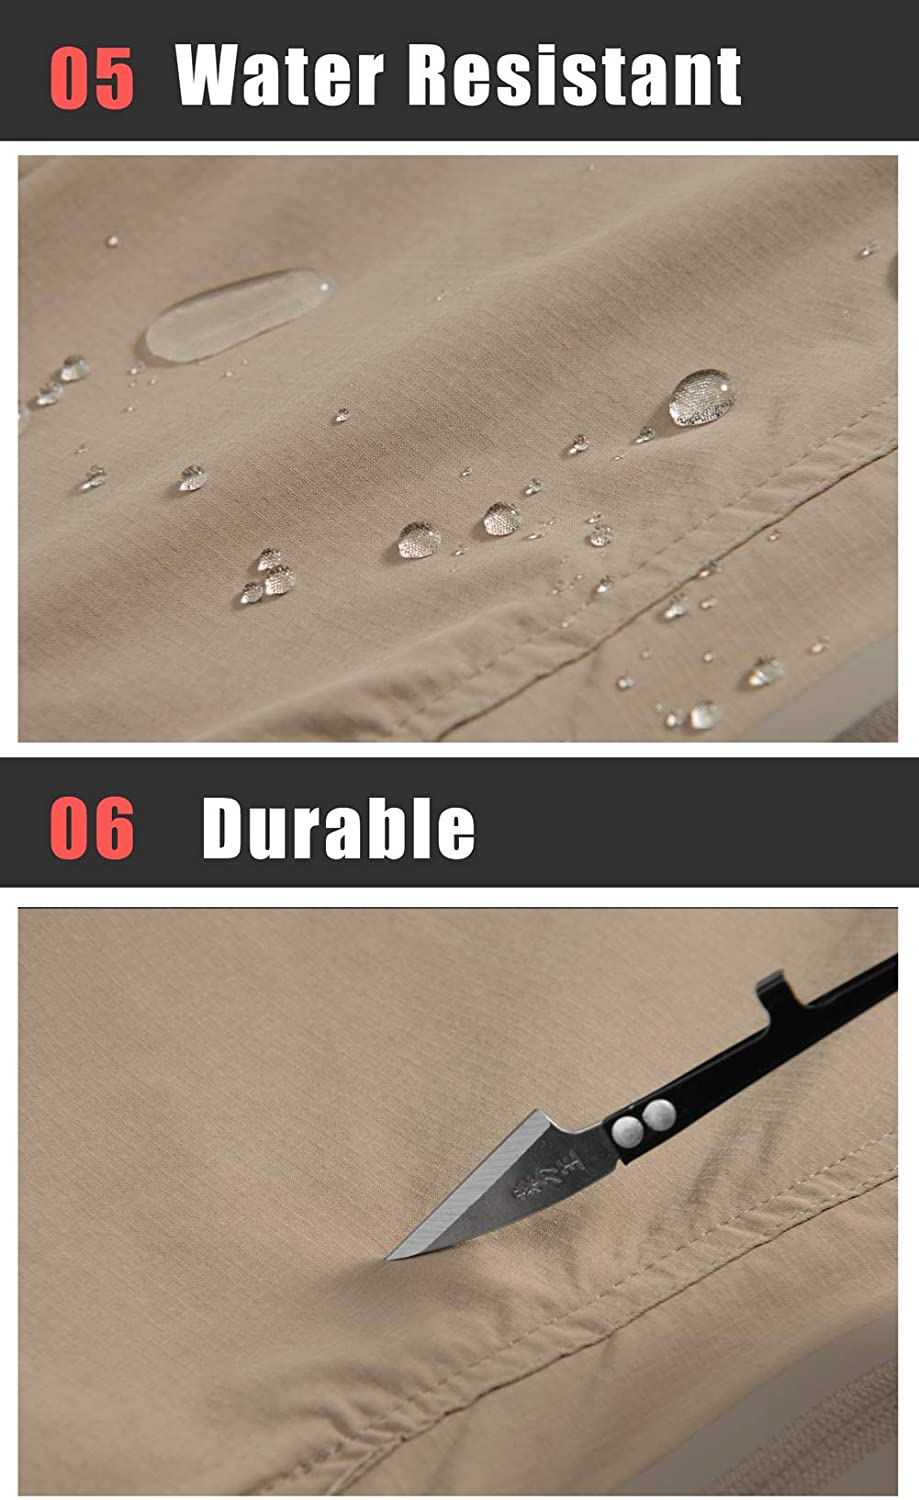 Water drops on men's water resistant lightweight summer pants. Knife trying to cut men's pants.